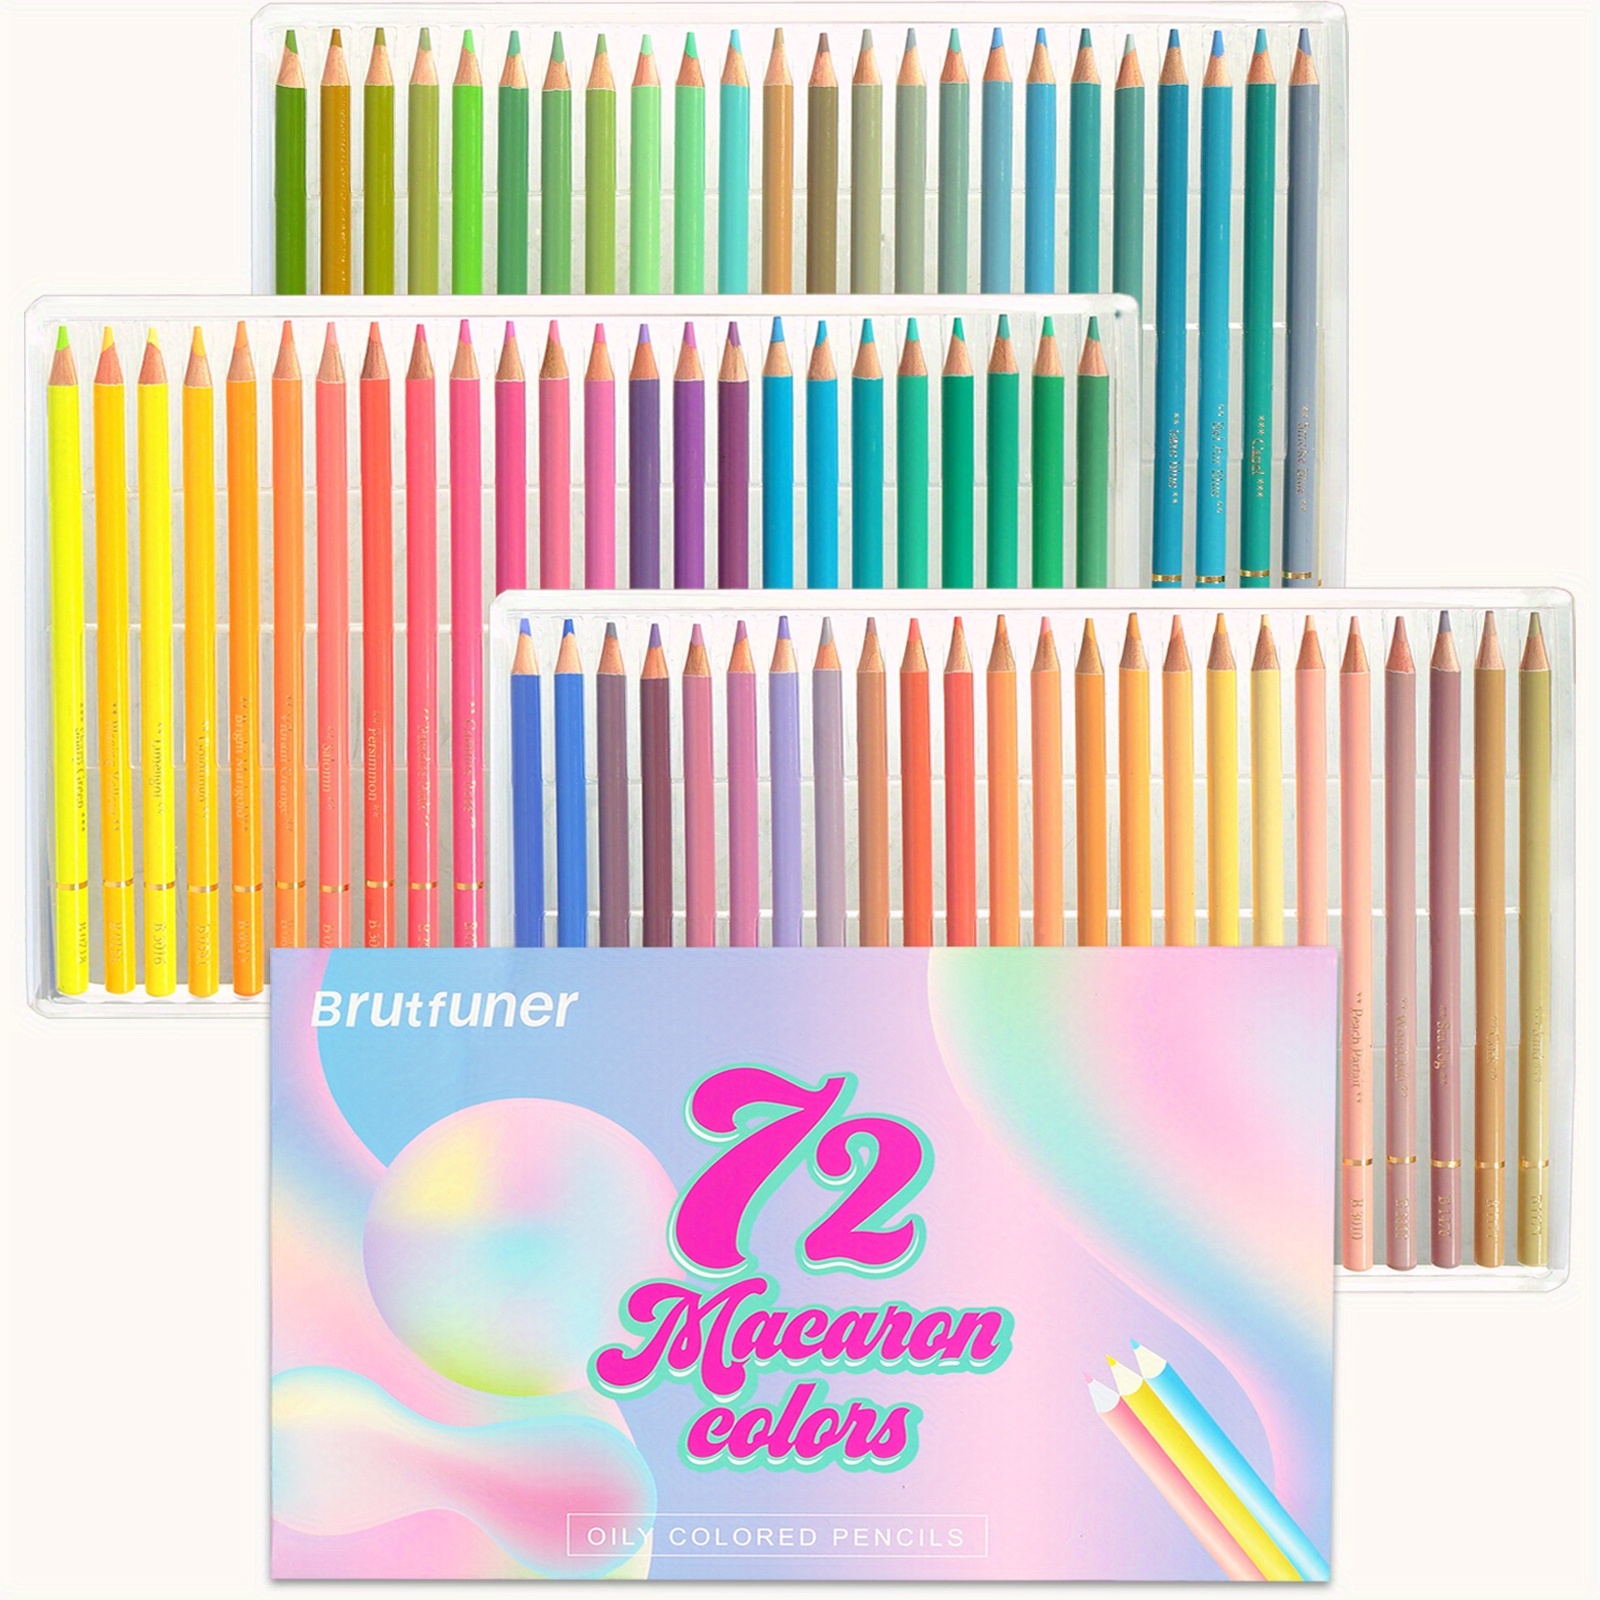  Pastel Colored Pencils, 50 Color Macaron Colored Pencils Set, Adult  Colored Pencils Set, Oil Based Art Pencils Set, Painting Colored Pencils  Set for Students and Children Art Painting : Office Products